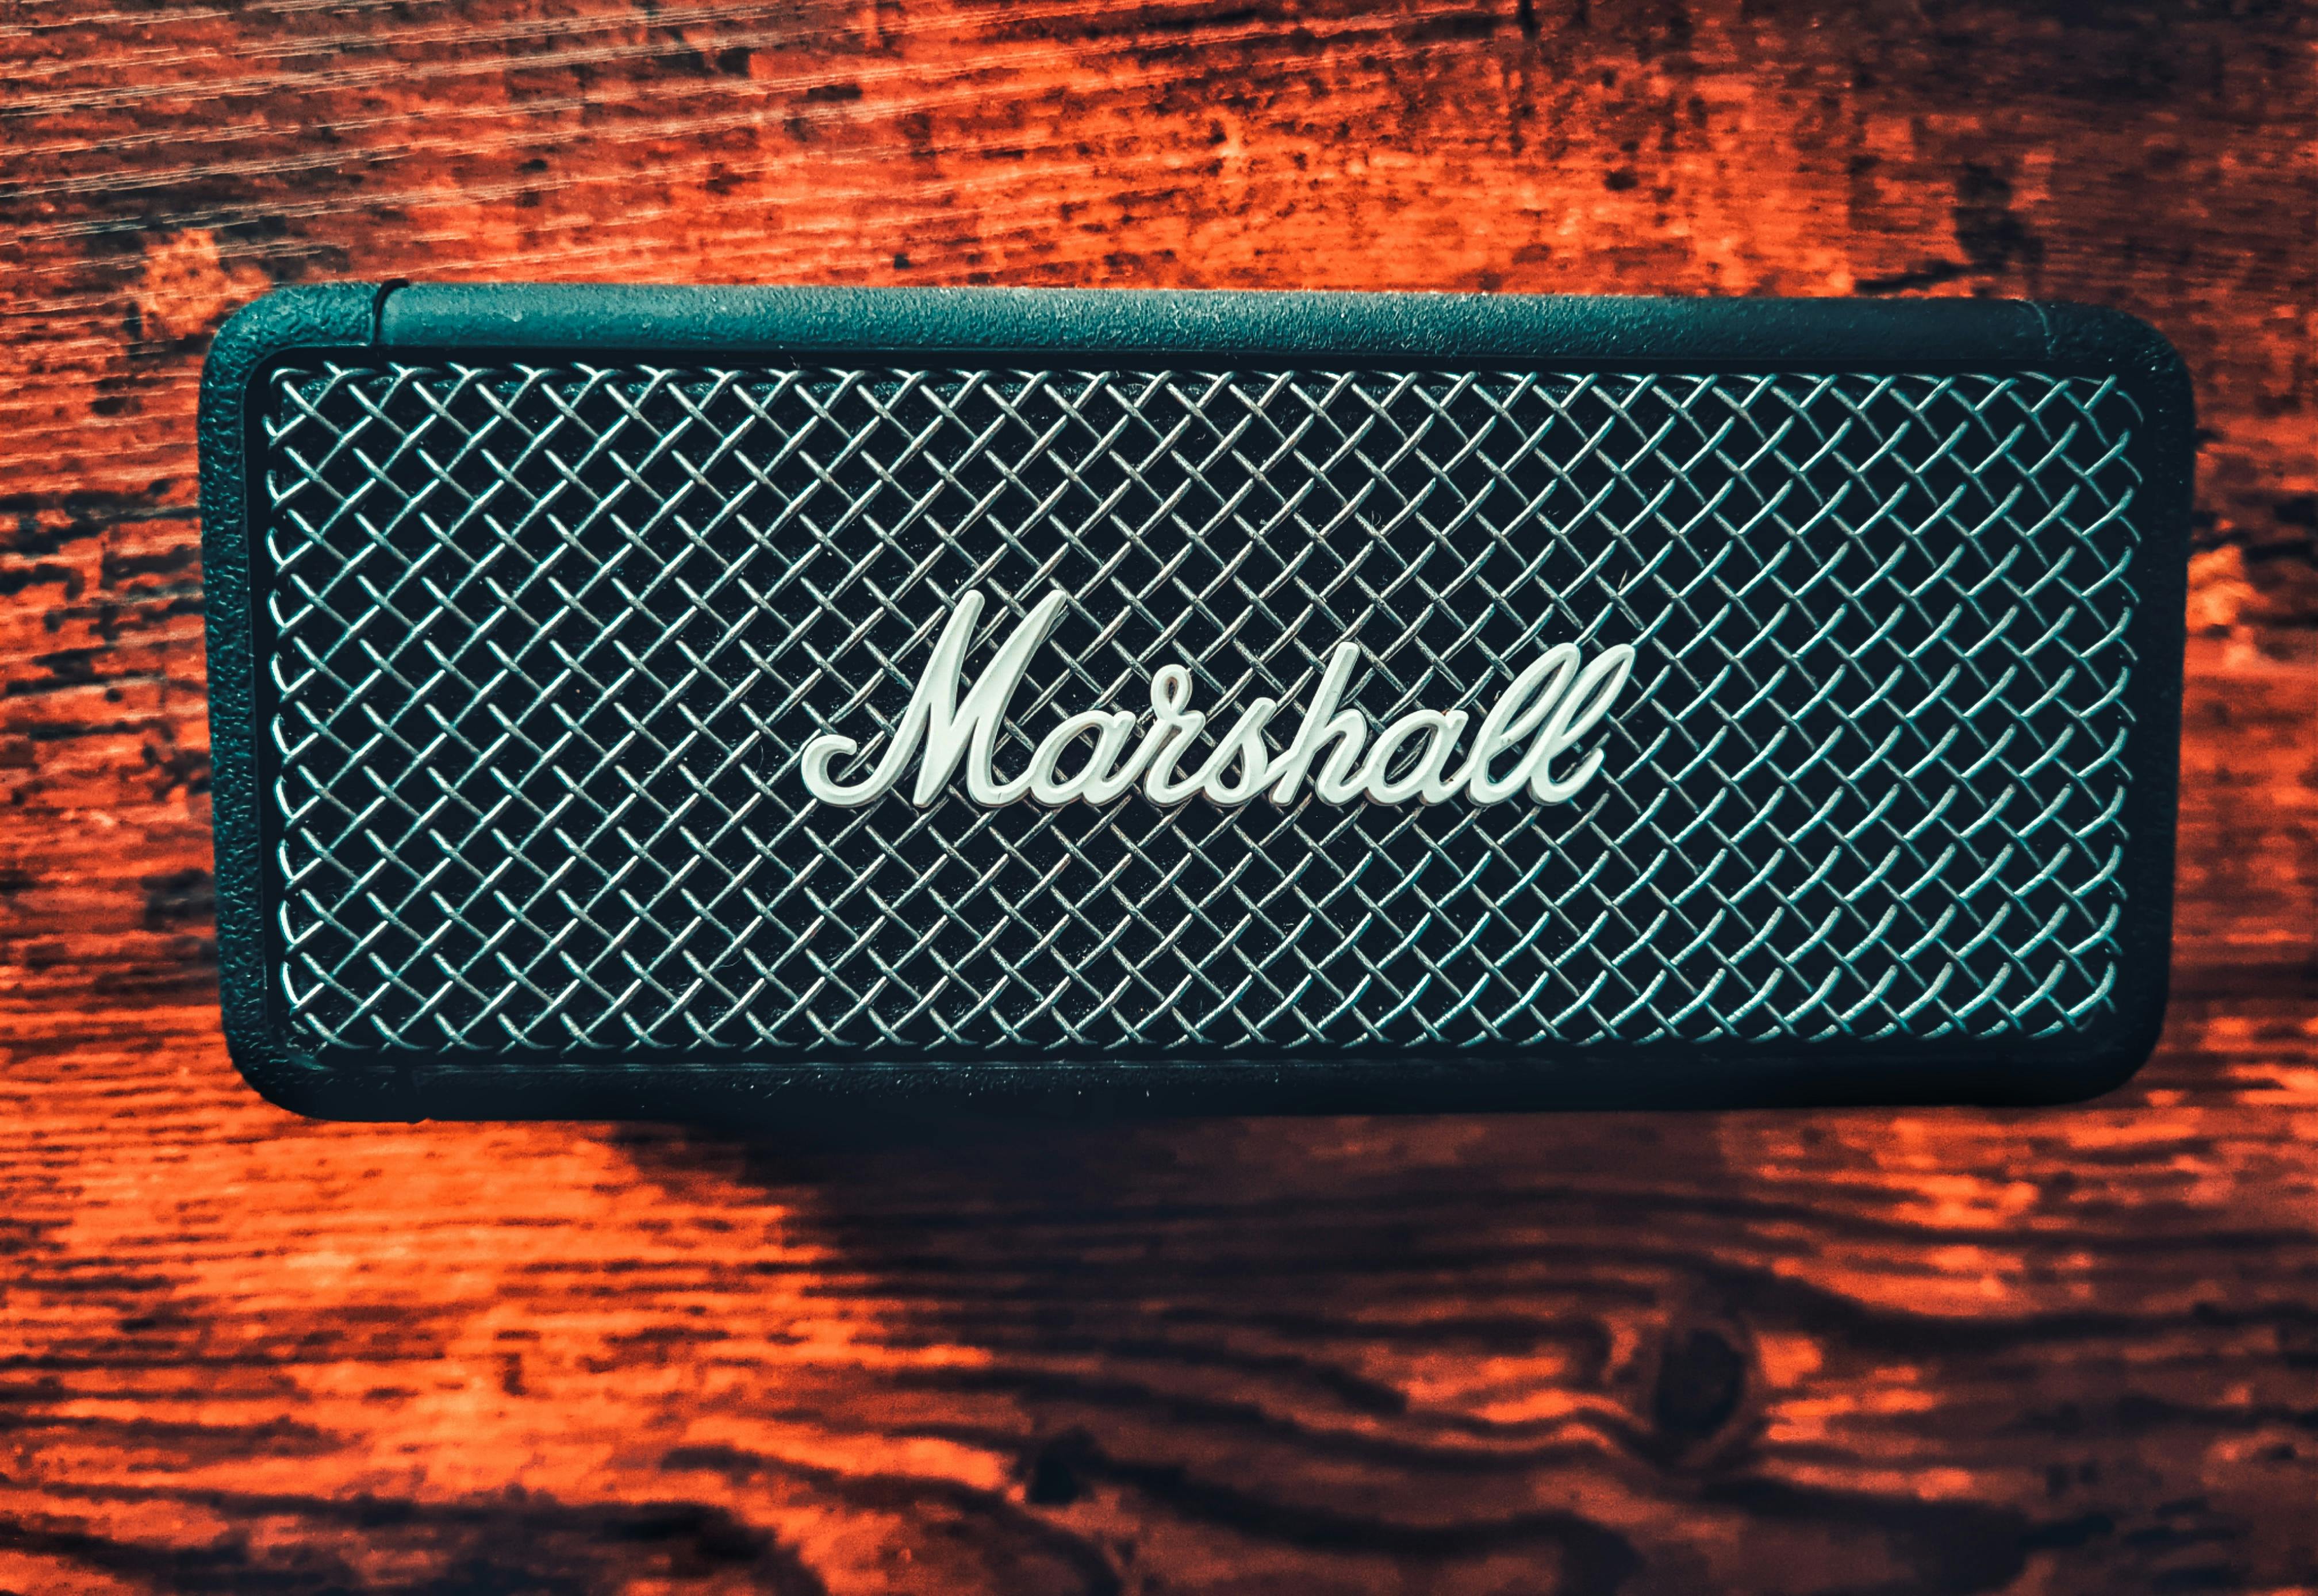 Marshall Amplification is being acquired by Zound, maker of Marshall  speakers